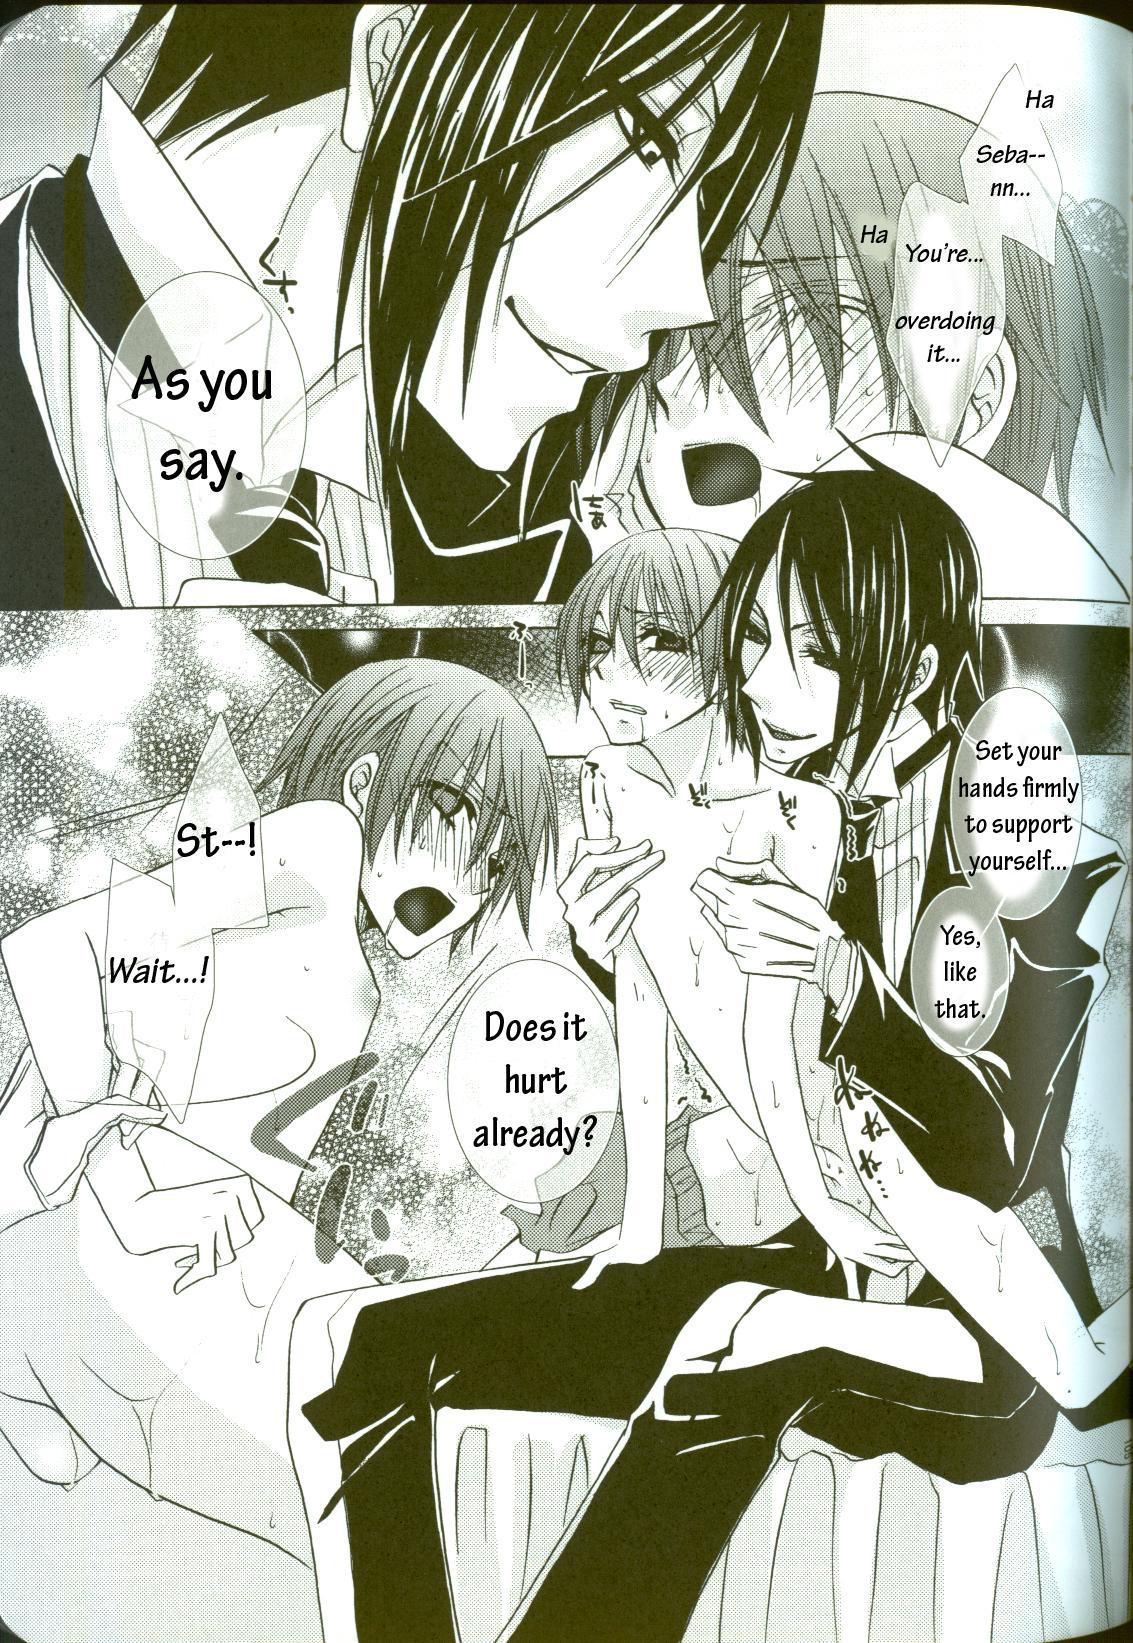 Panty Trick or Treat? - Black butler Tranny Porn - Page 12